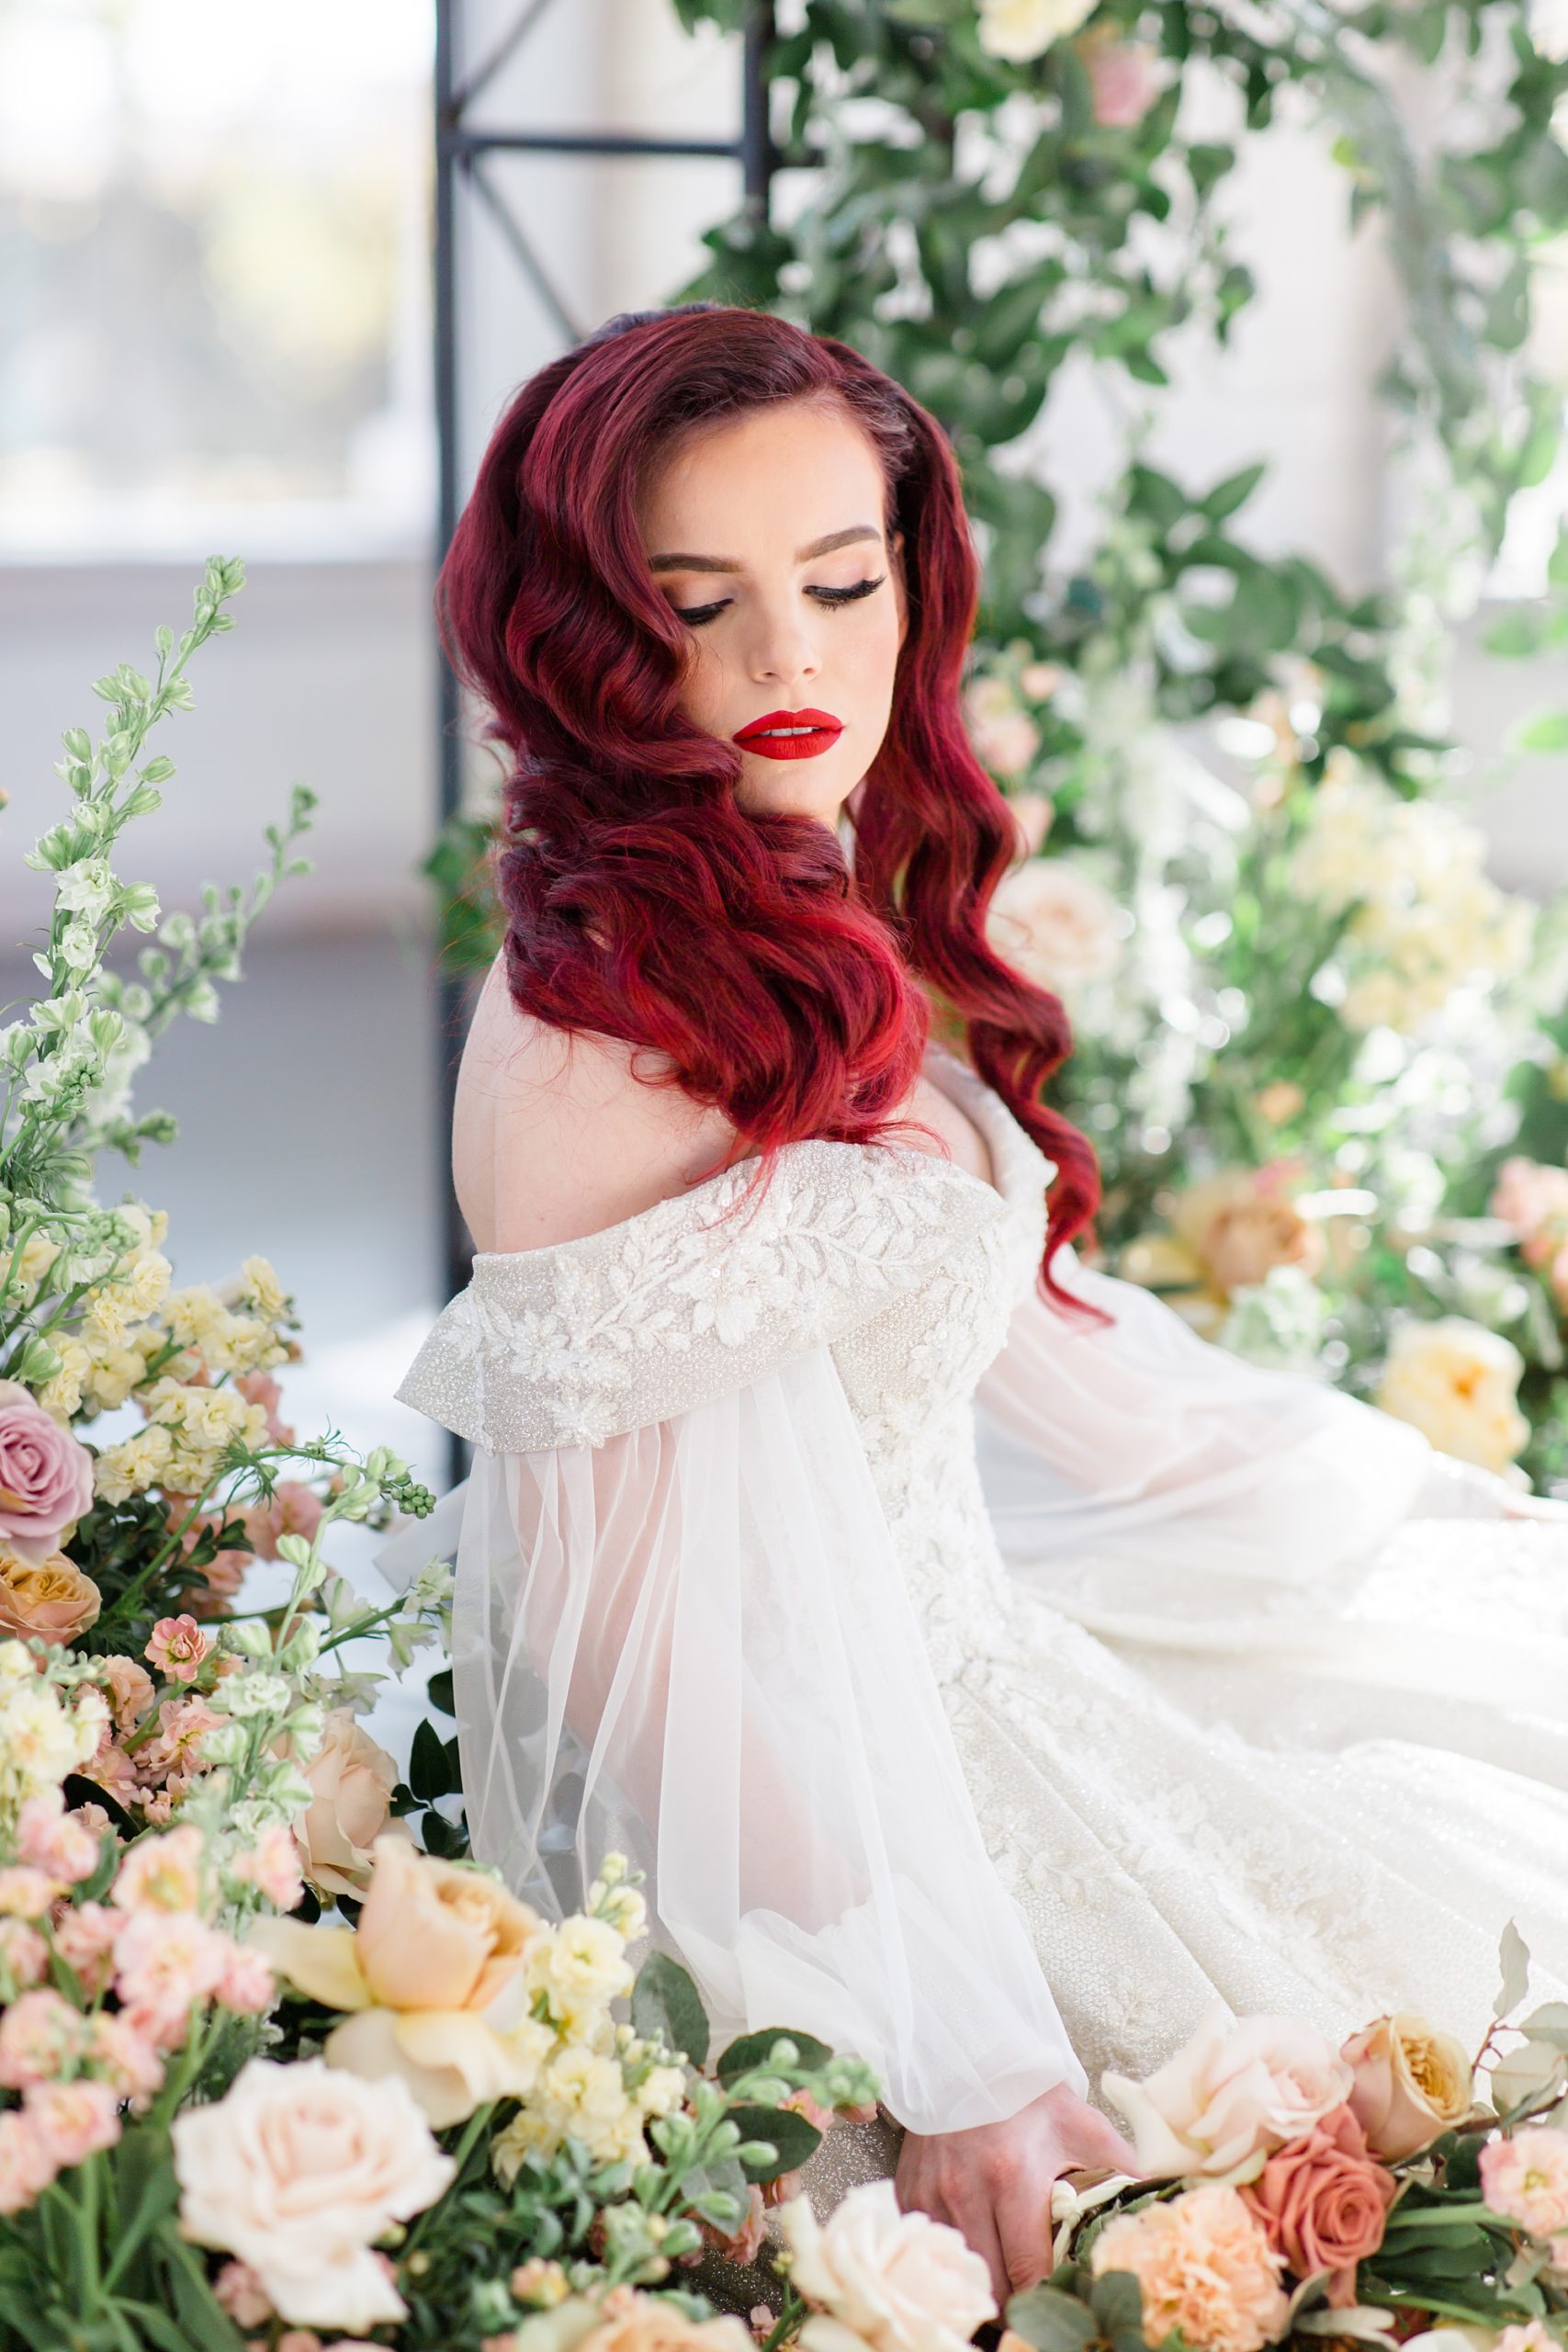 bride with red hair looks over shoulder while sitting amongst flowers by Gothic arch